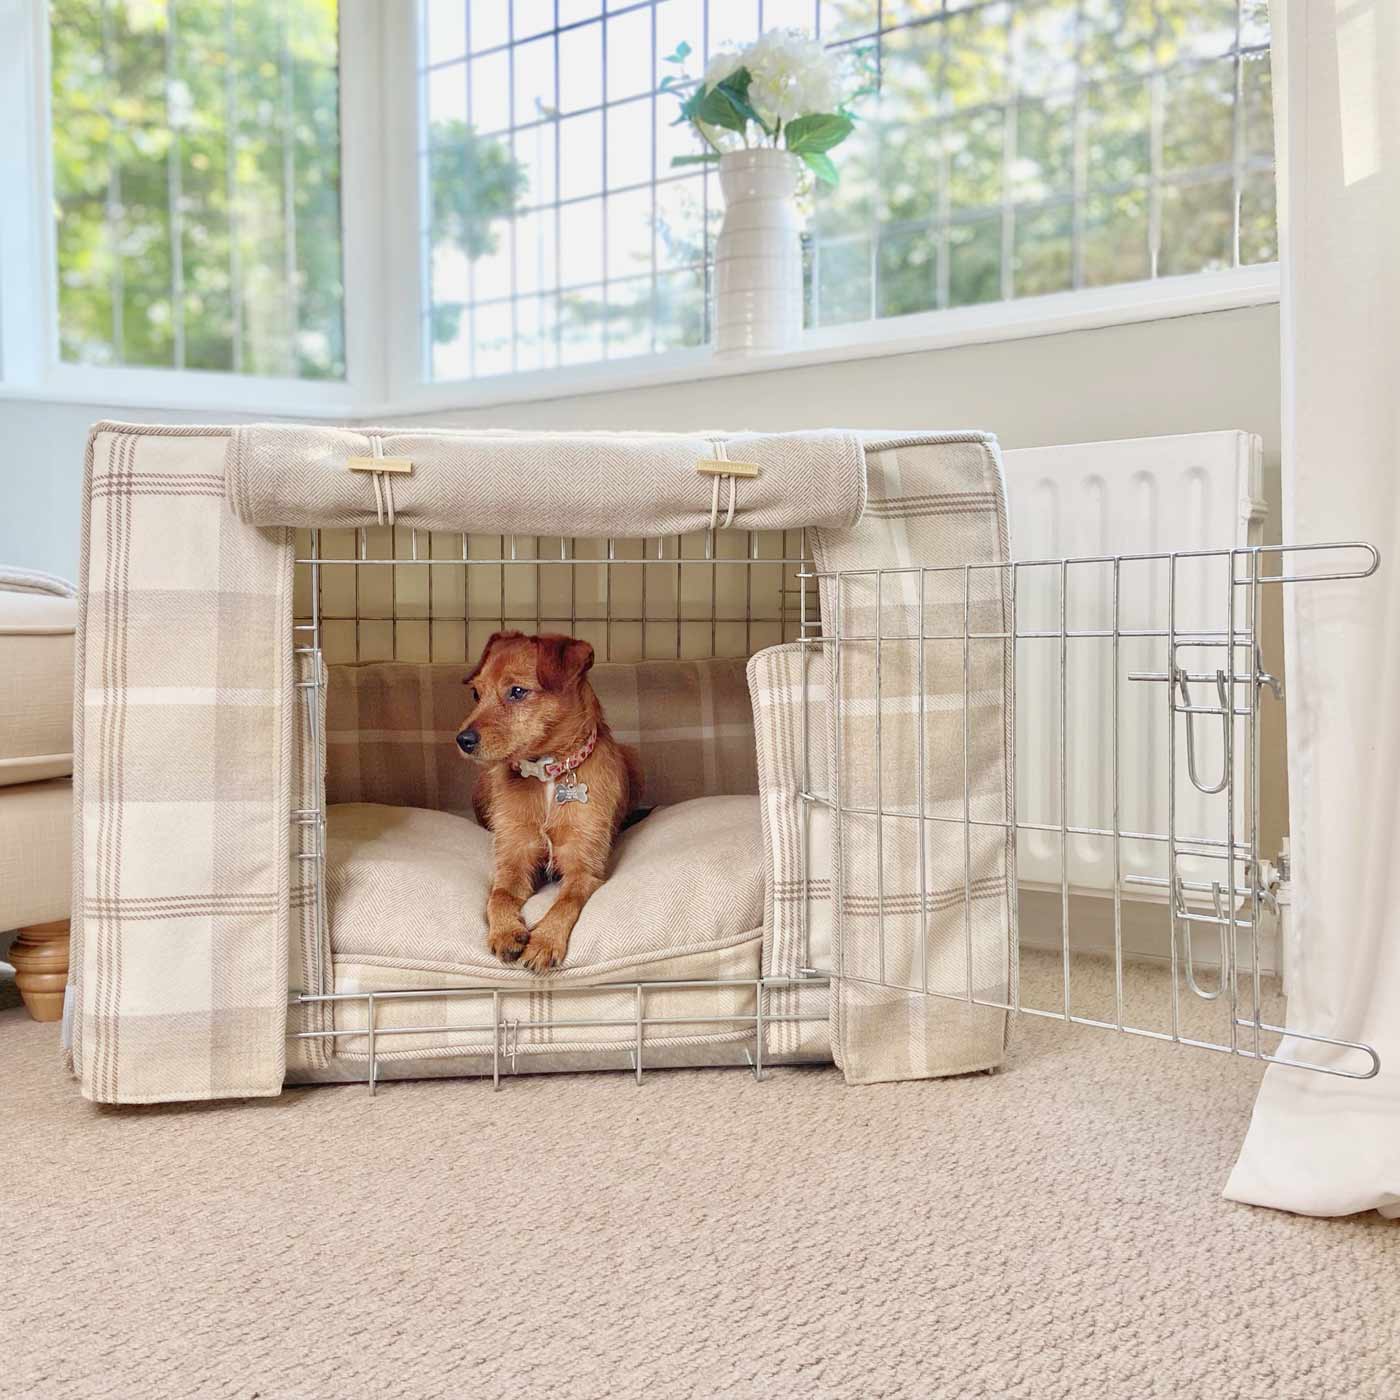 Balmoral Natural Tweed Cage Set, The Perfect Dog Cage Set For The Ultimate Naptime, Available To Personalize at Lords & Labradors US